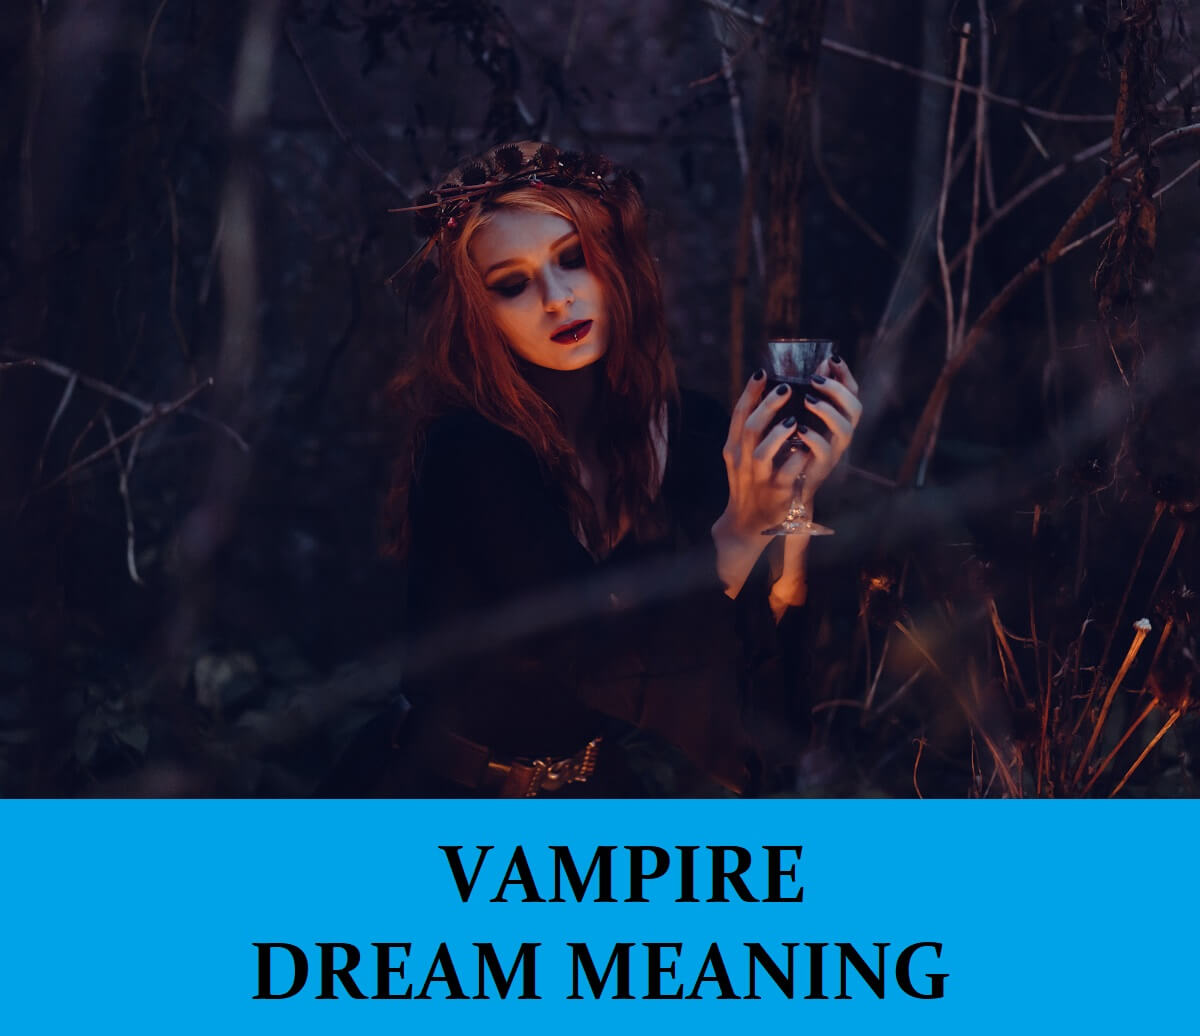 Dream About Vampires